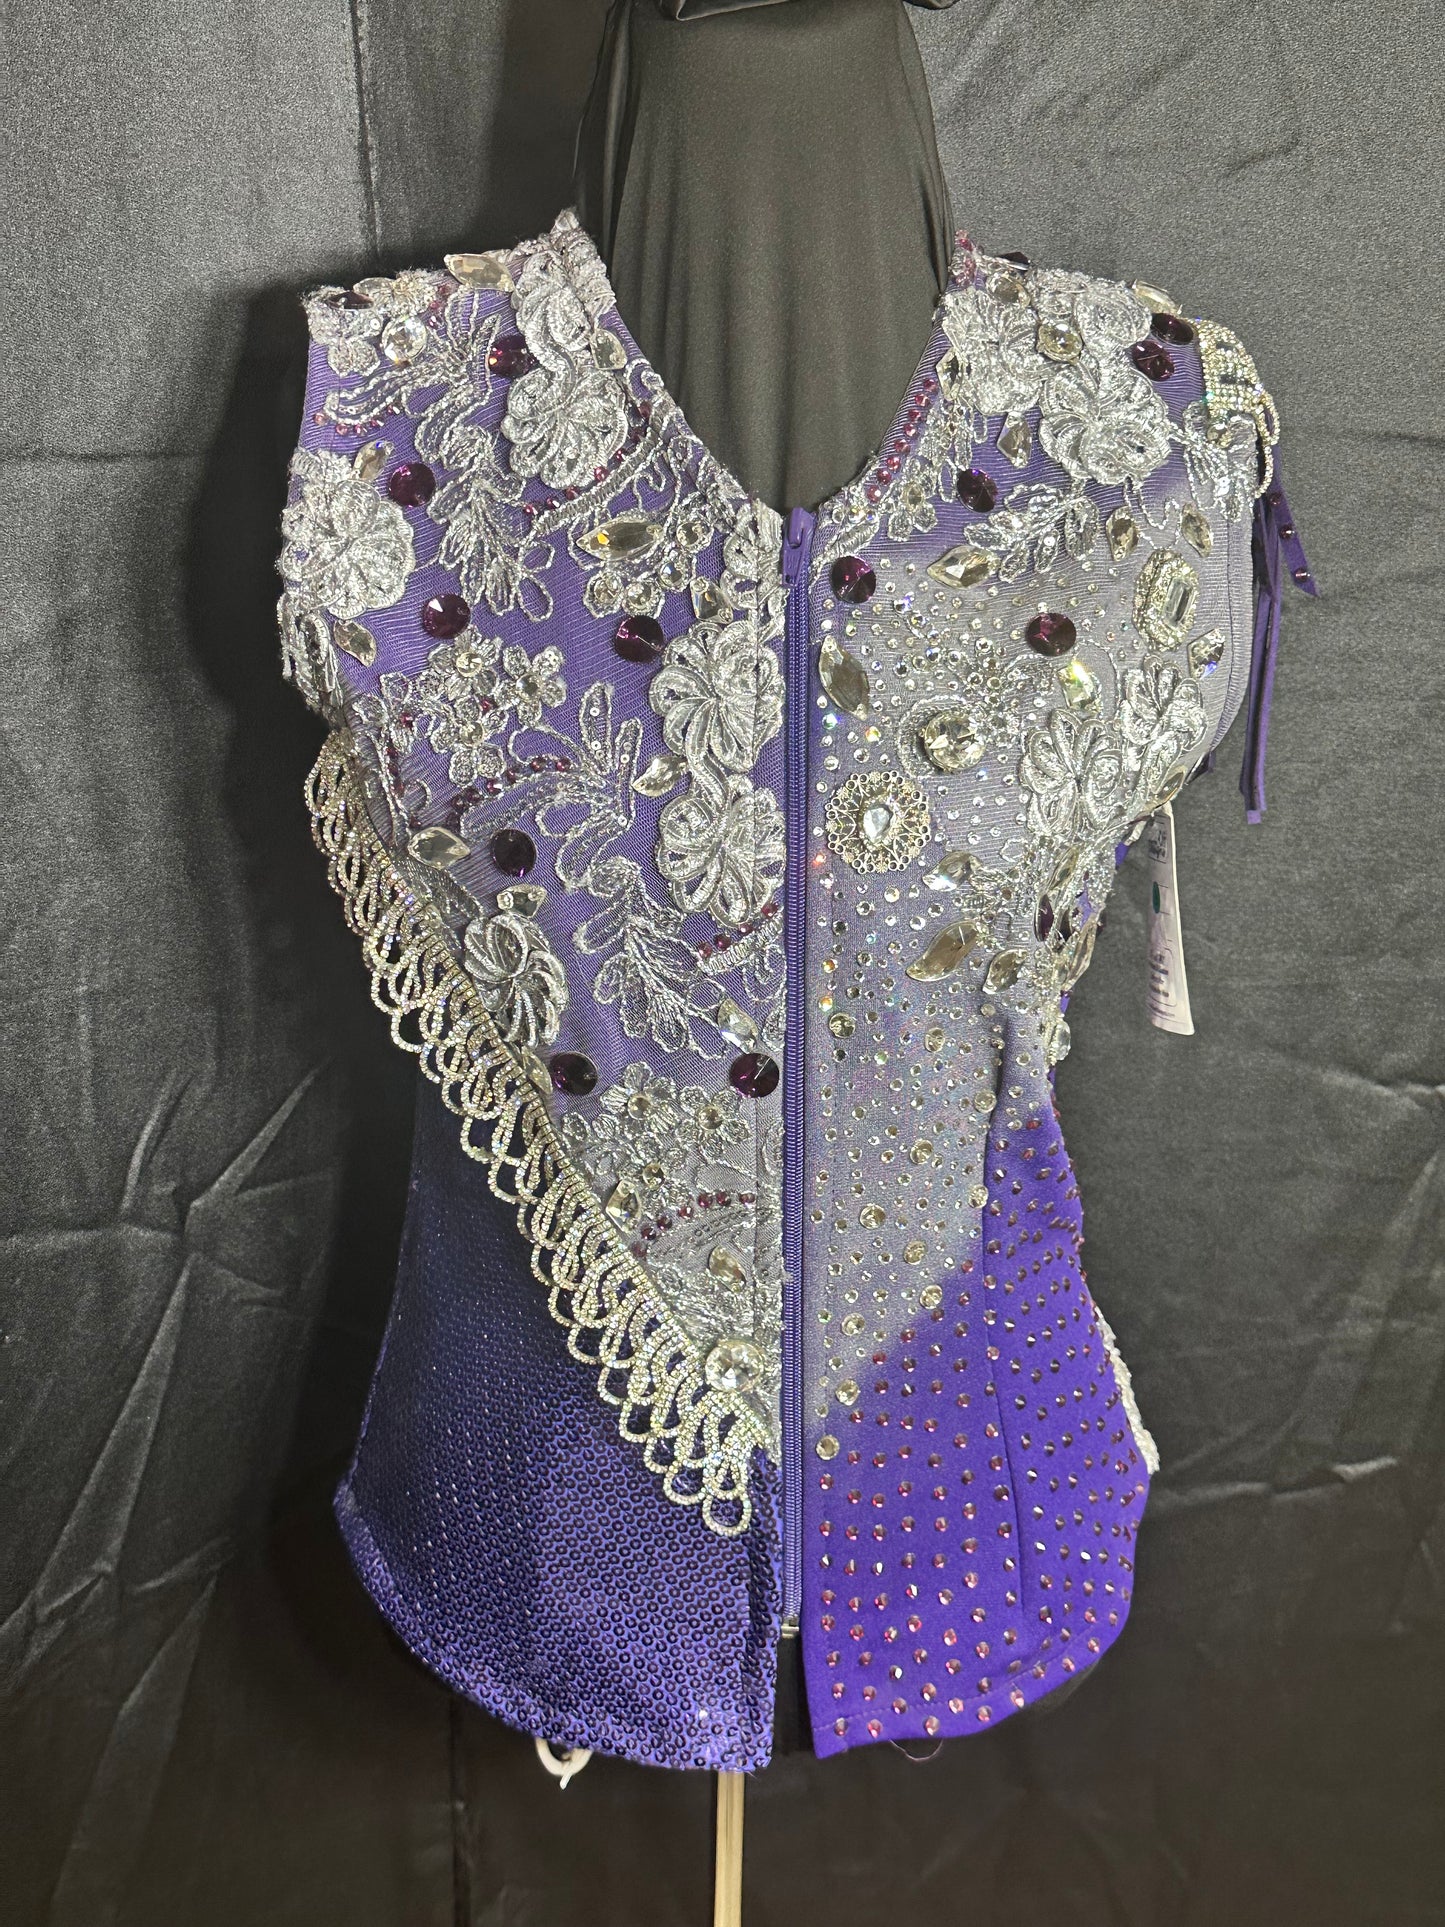 Size small purple vest with airbrushed design.